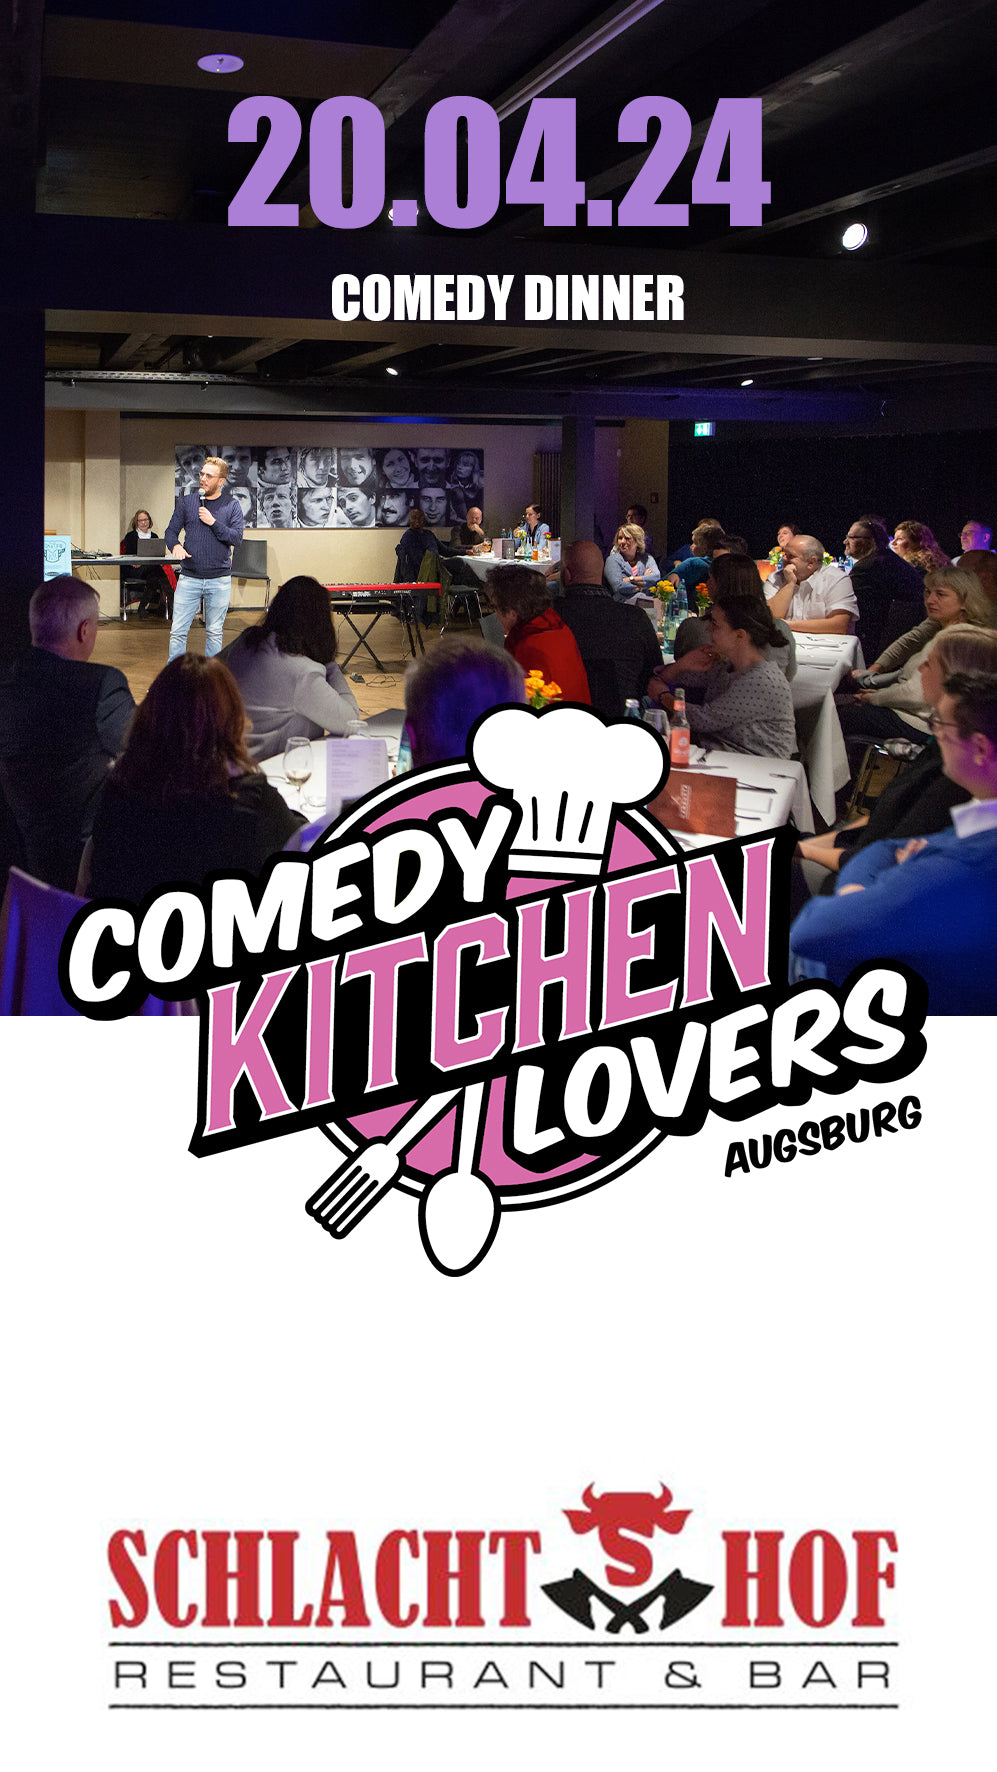 Comedy Kitchen Lovers